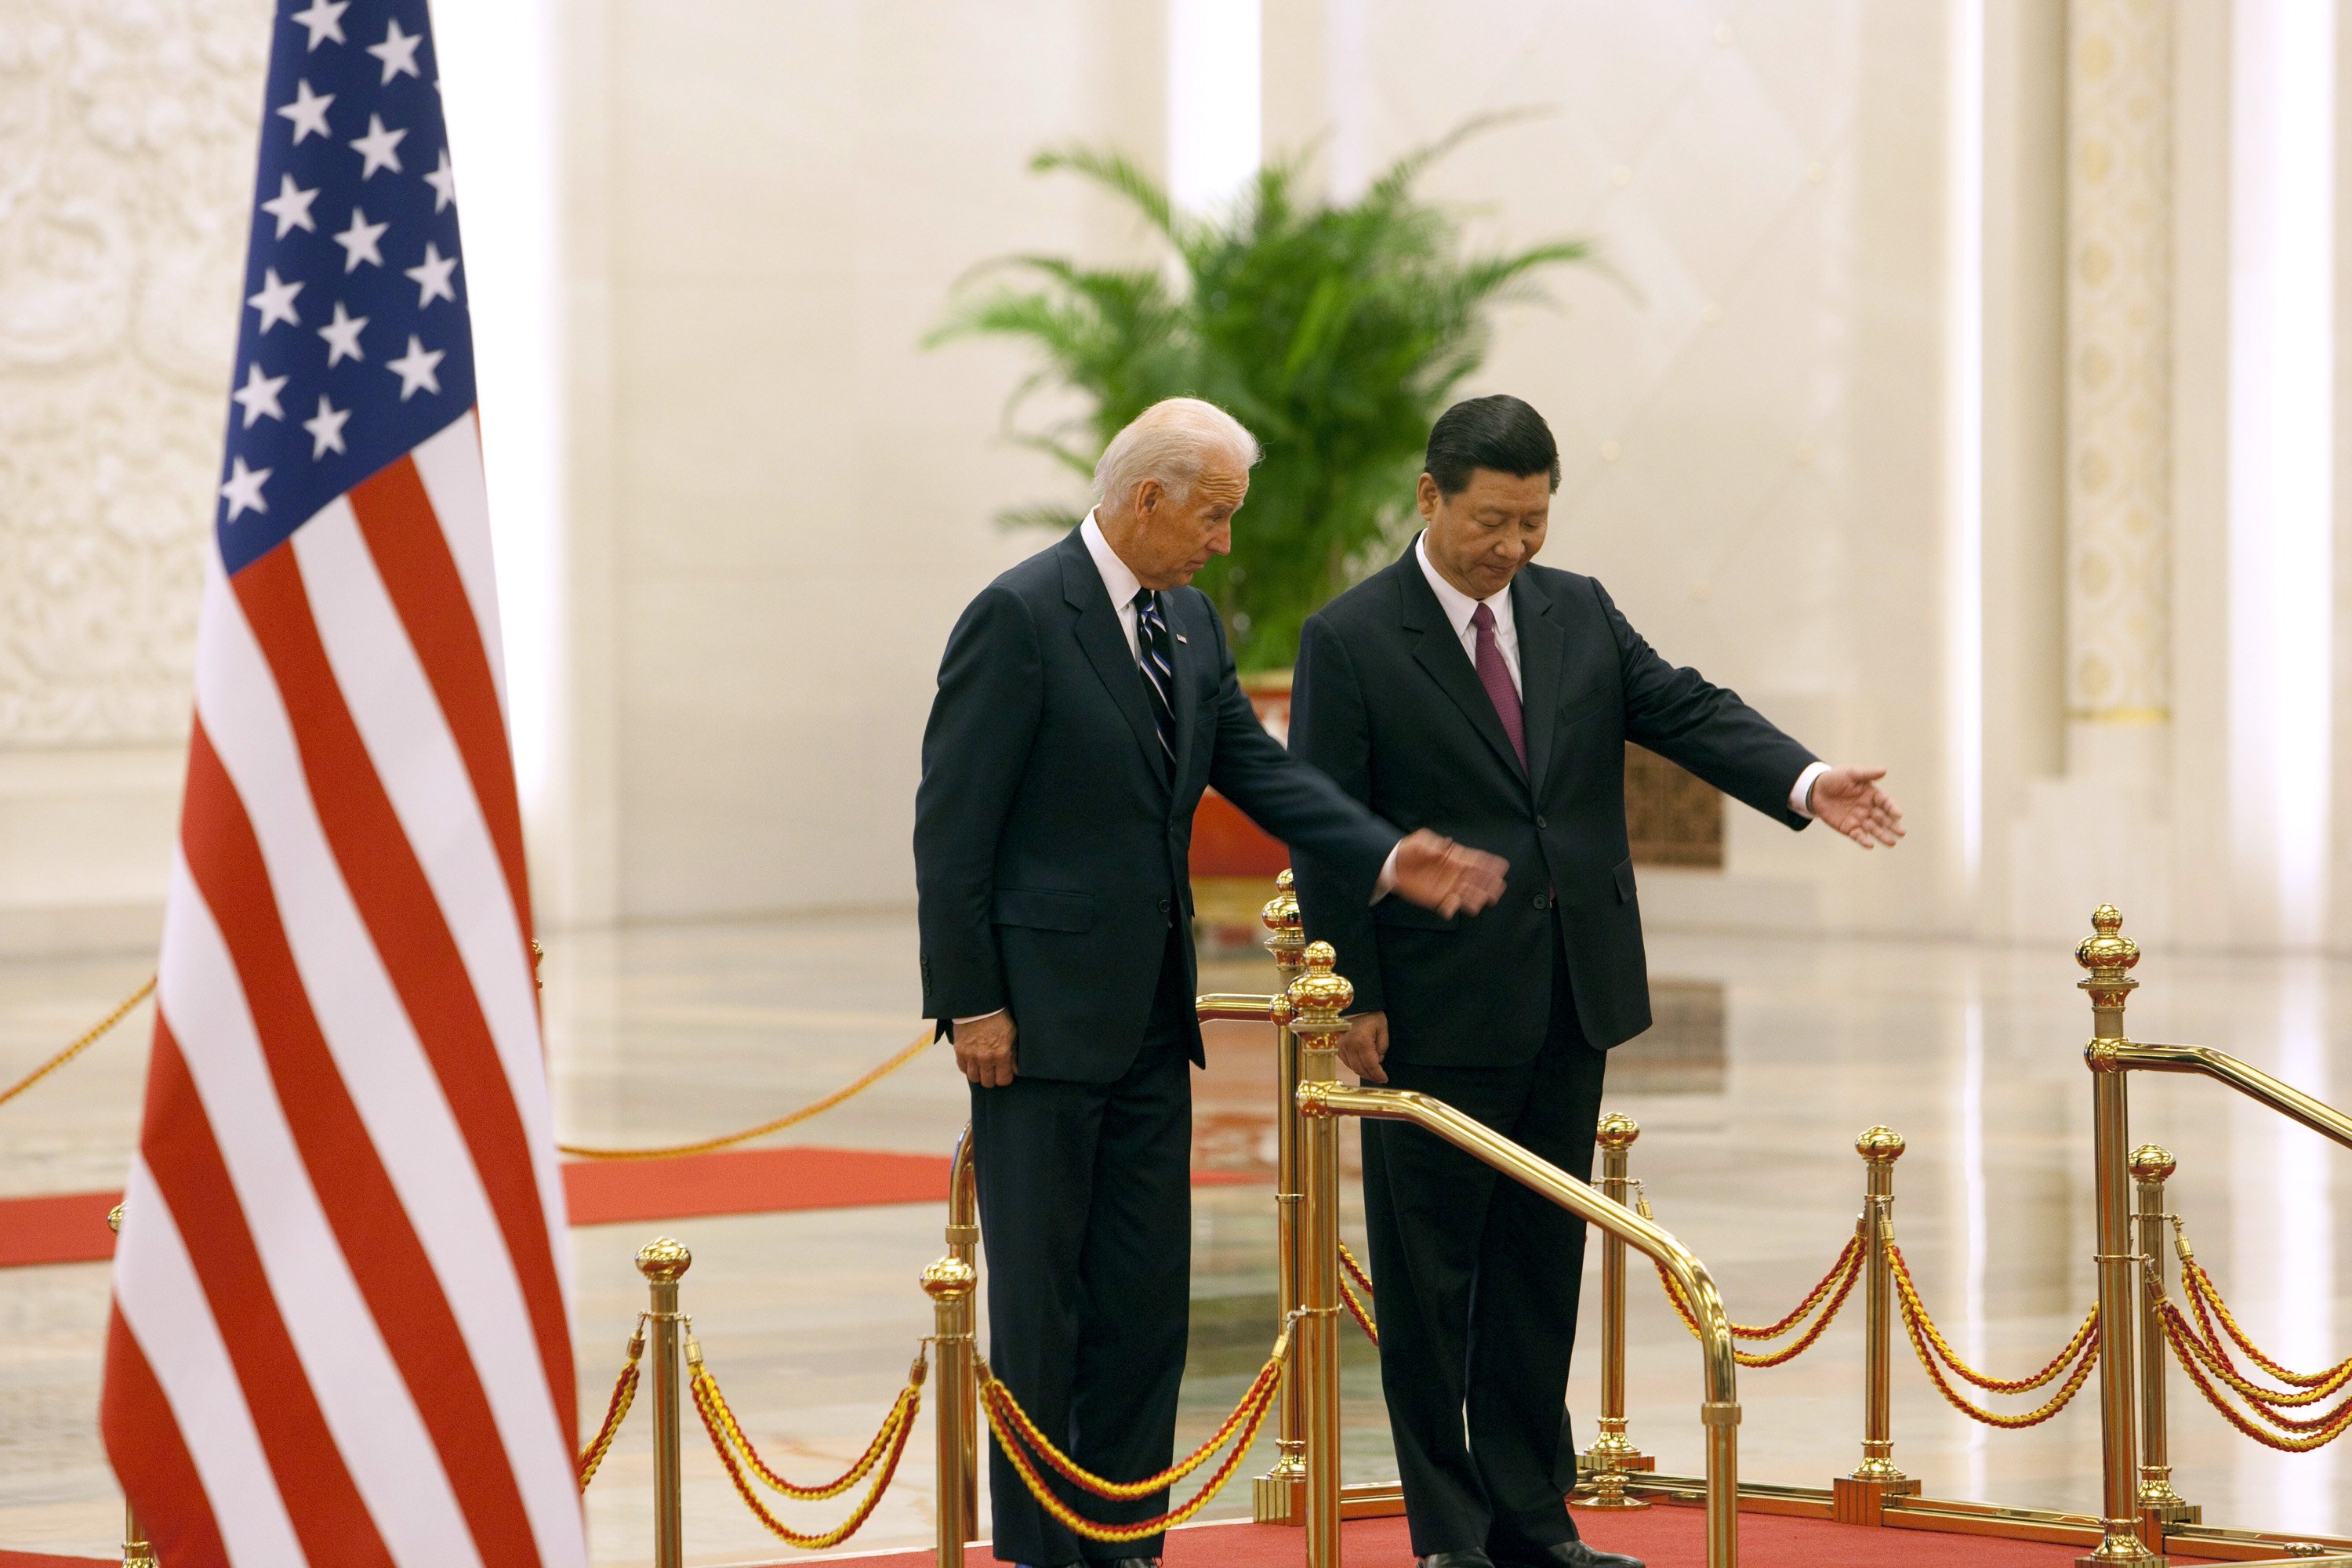 China's then Vice President Xi Jinping (R) attends a welcoming ceremony with then U.S. Vice President Joe Biden at the Great Hall of the People in Beijing, China, Aug. 18, 2011. (Photo by Getty Images)